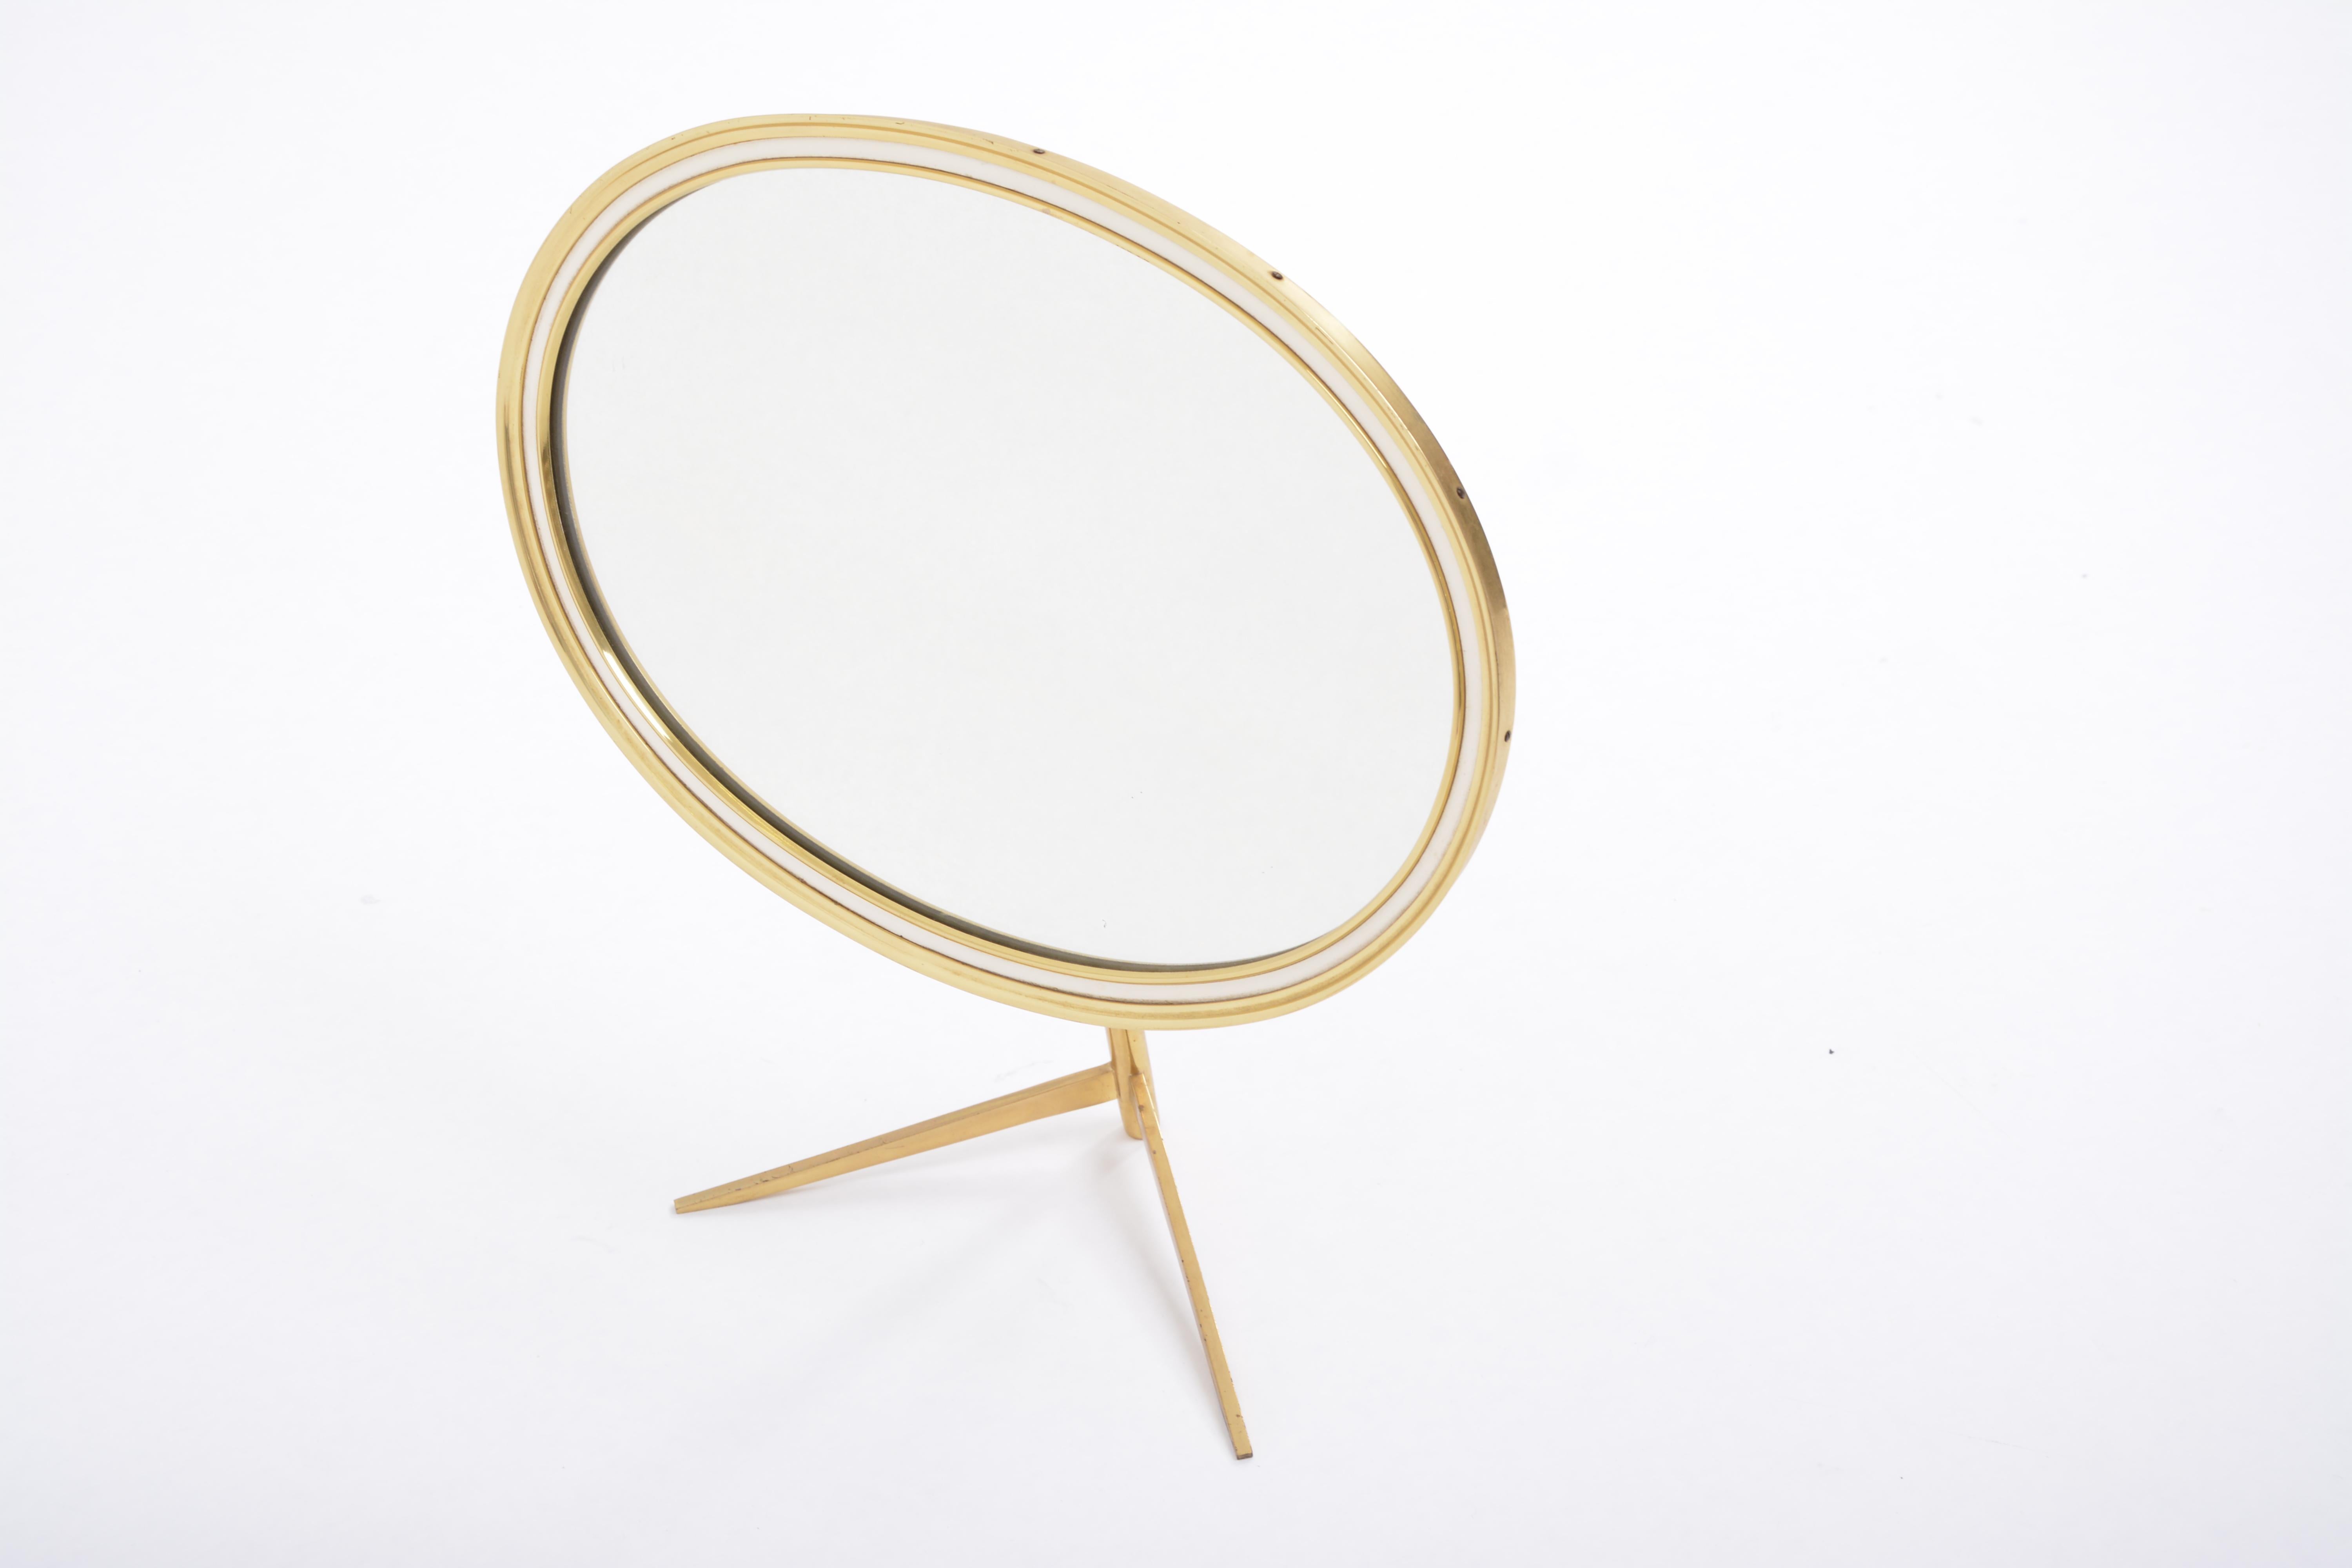 Mid-Century Modern oval brass table mirror by Vereinigte Werkstätten
This Mid-Century Modern table mirror features a solid brass stand and frame. The mirror can be adjusted to the desired angle.
The backside of this table mirror is covered with